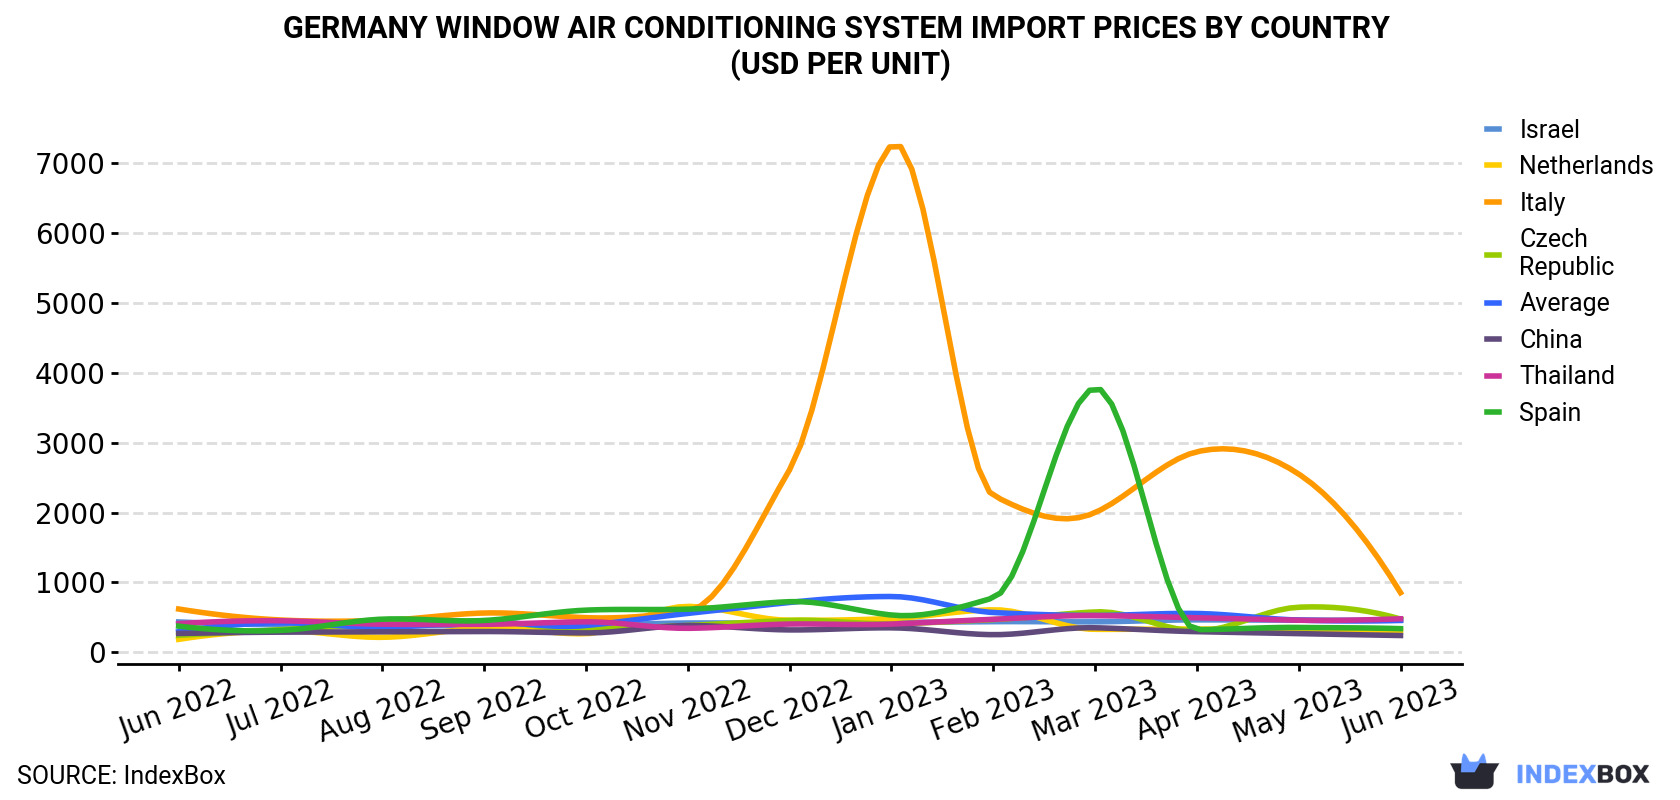 Germany Window Air Conditioning System Import Prices By Country (USD Per Unit)